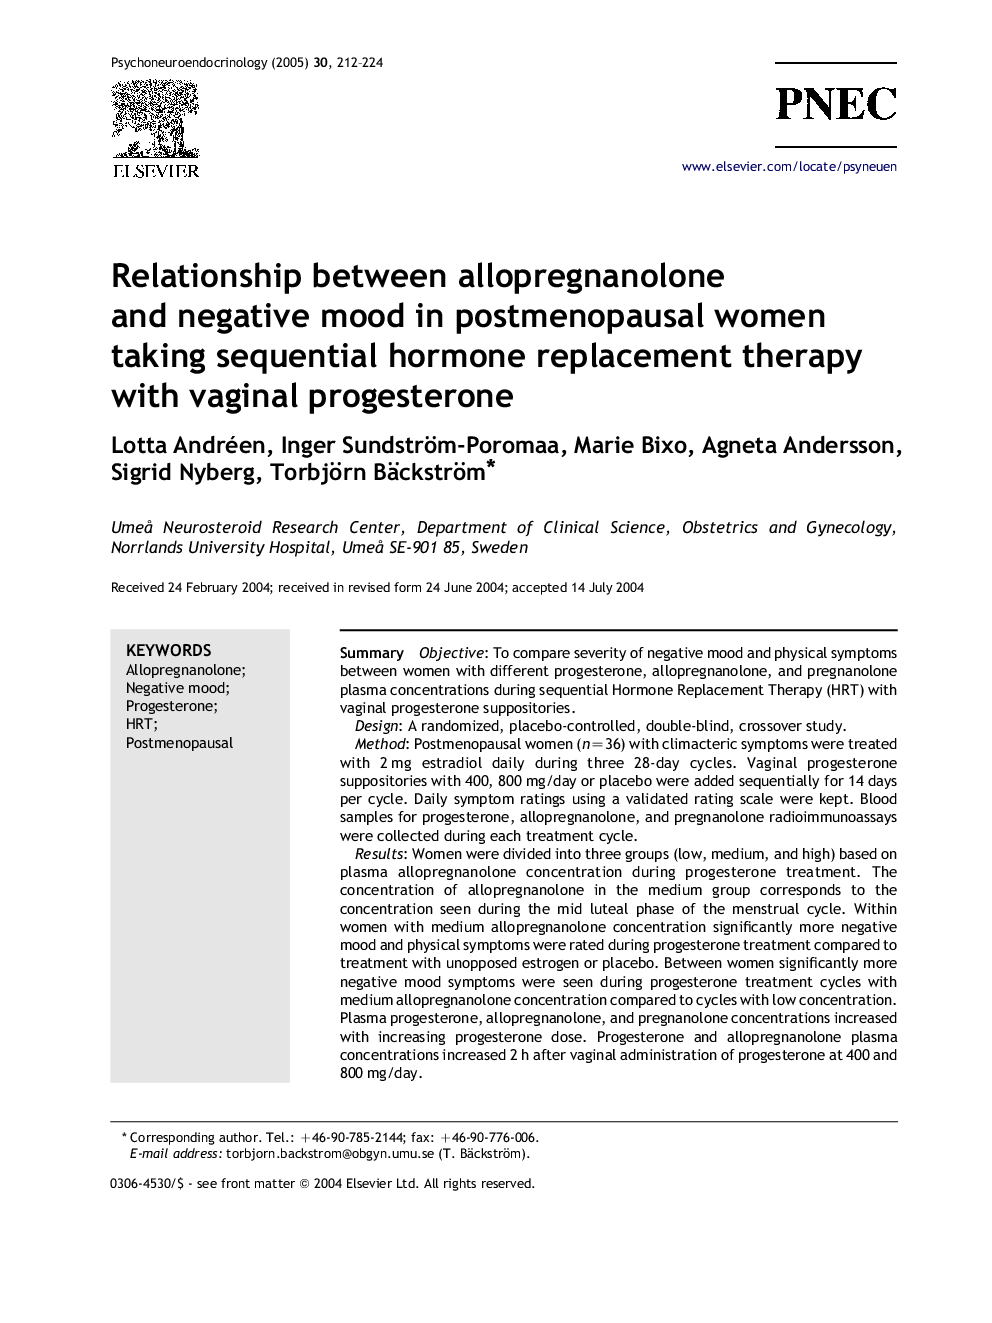 Relationship between allopregnanolone and negative mood in postmenopausal women taking sequential hormone replacement therapy with vaginal progesterone